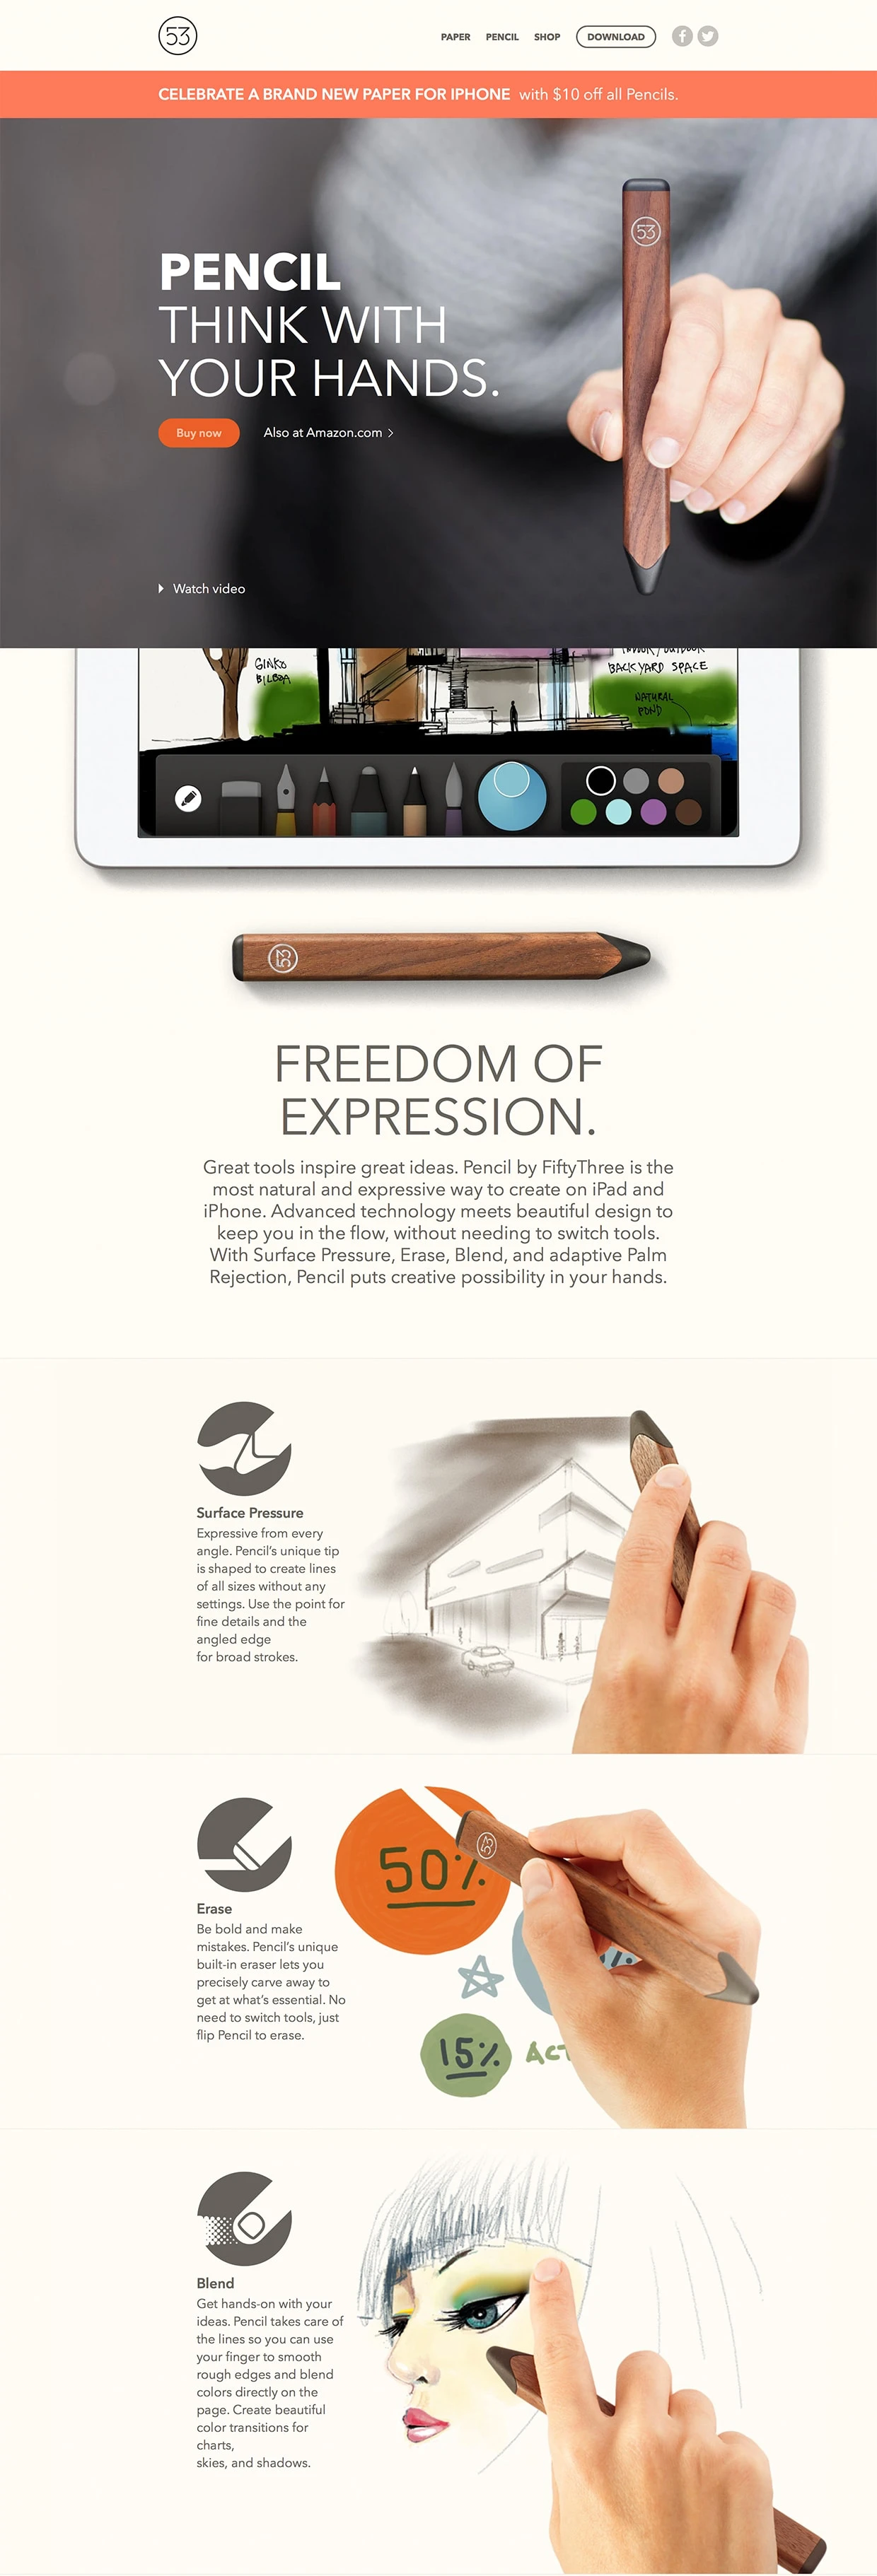 Pencil by FiftyThree Landing Page Example: Pencil by FiftyThree is a revolutionary stylus for touch-screen devices. Use Pencil with Paper to express your ideas beautifully and easily.